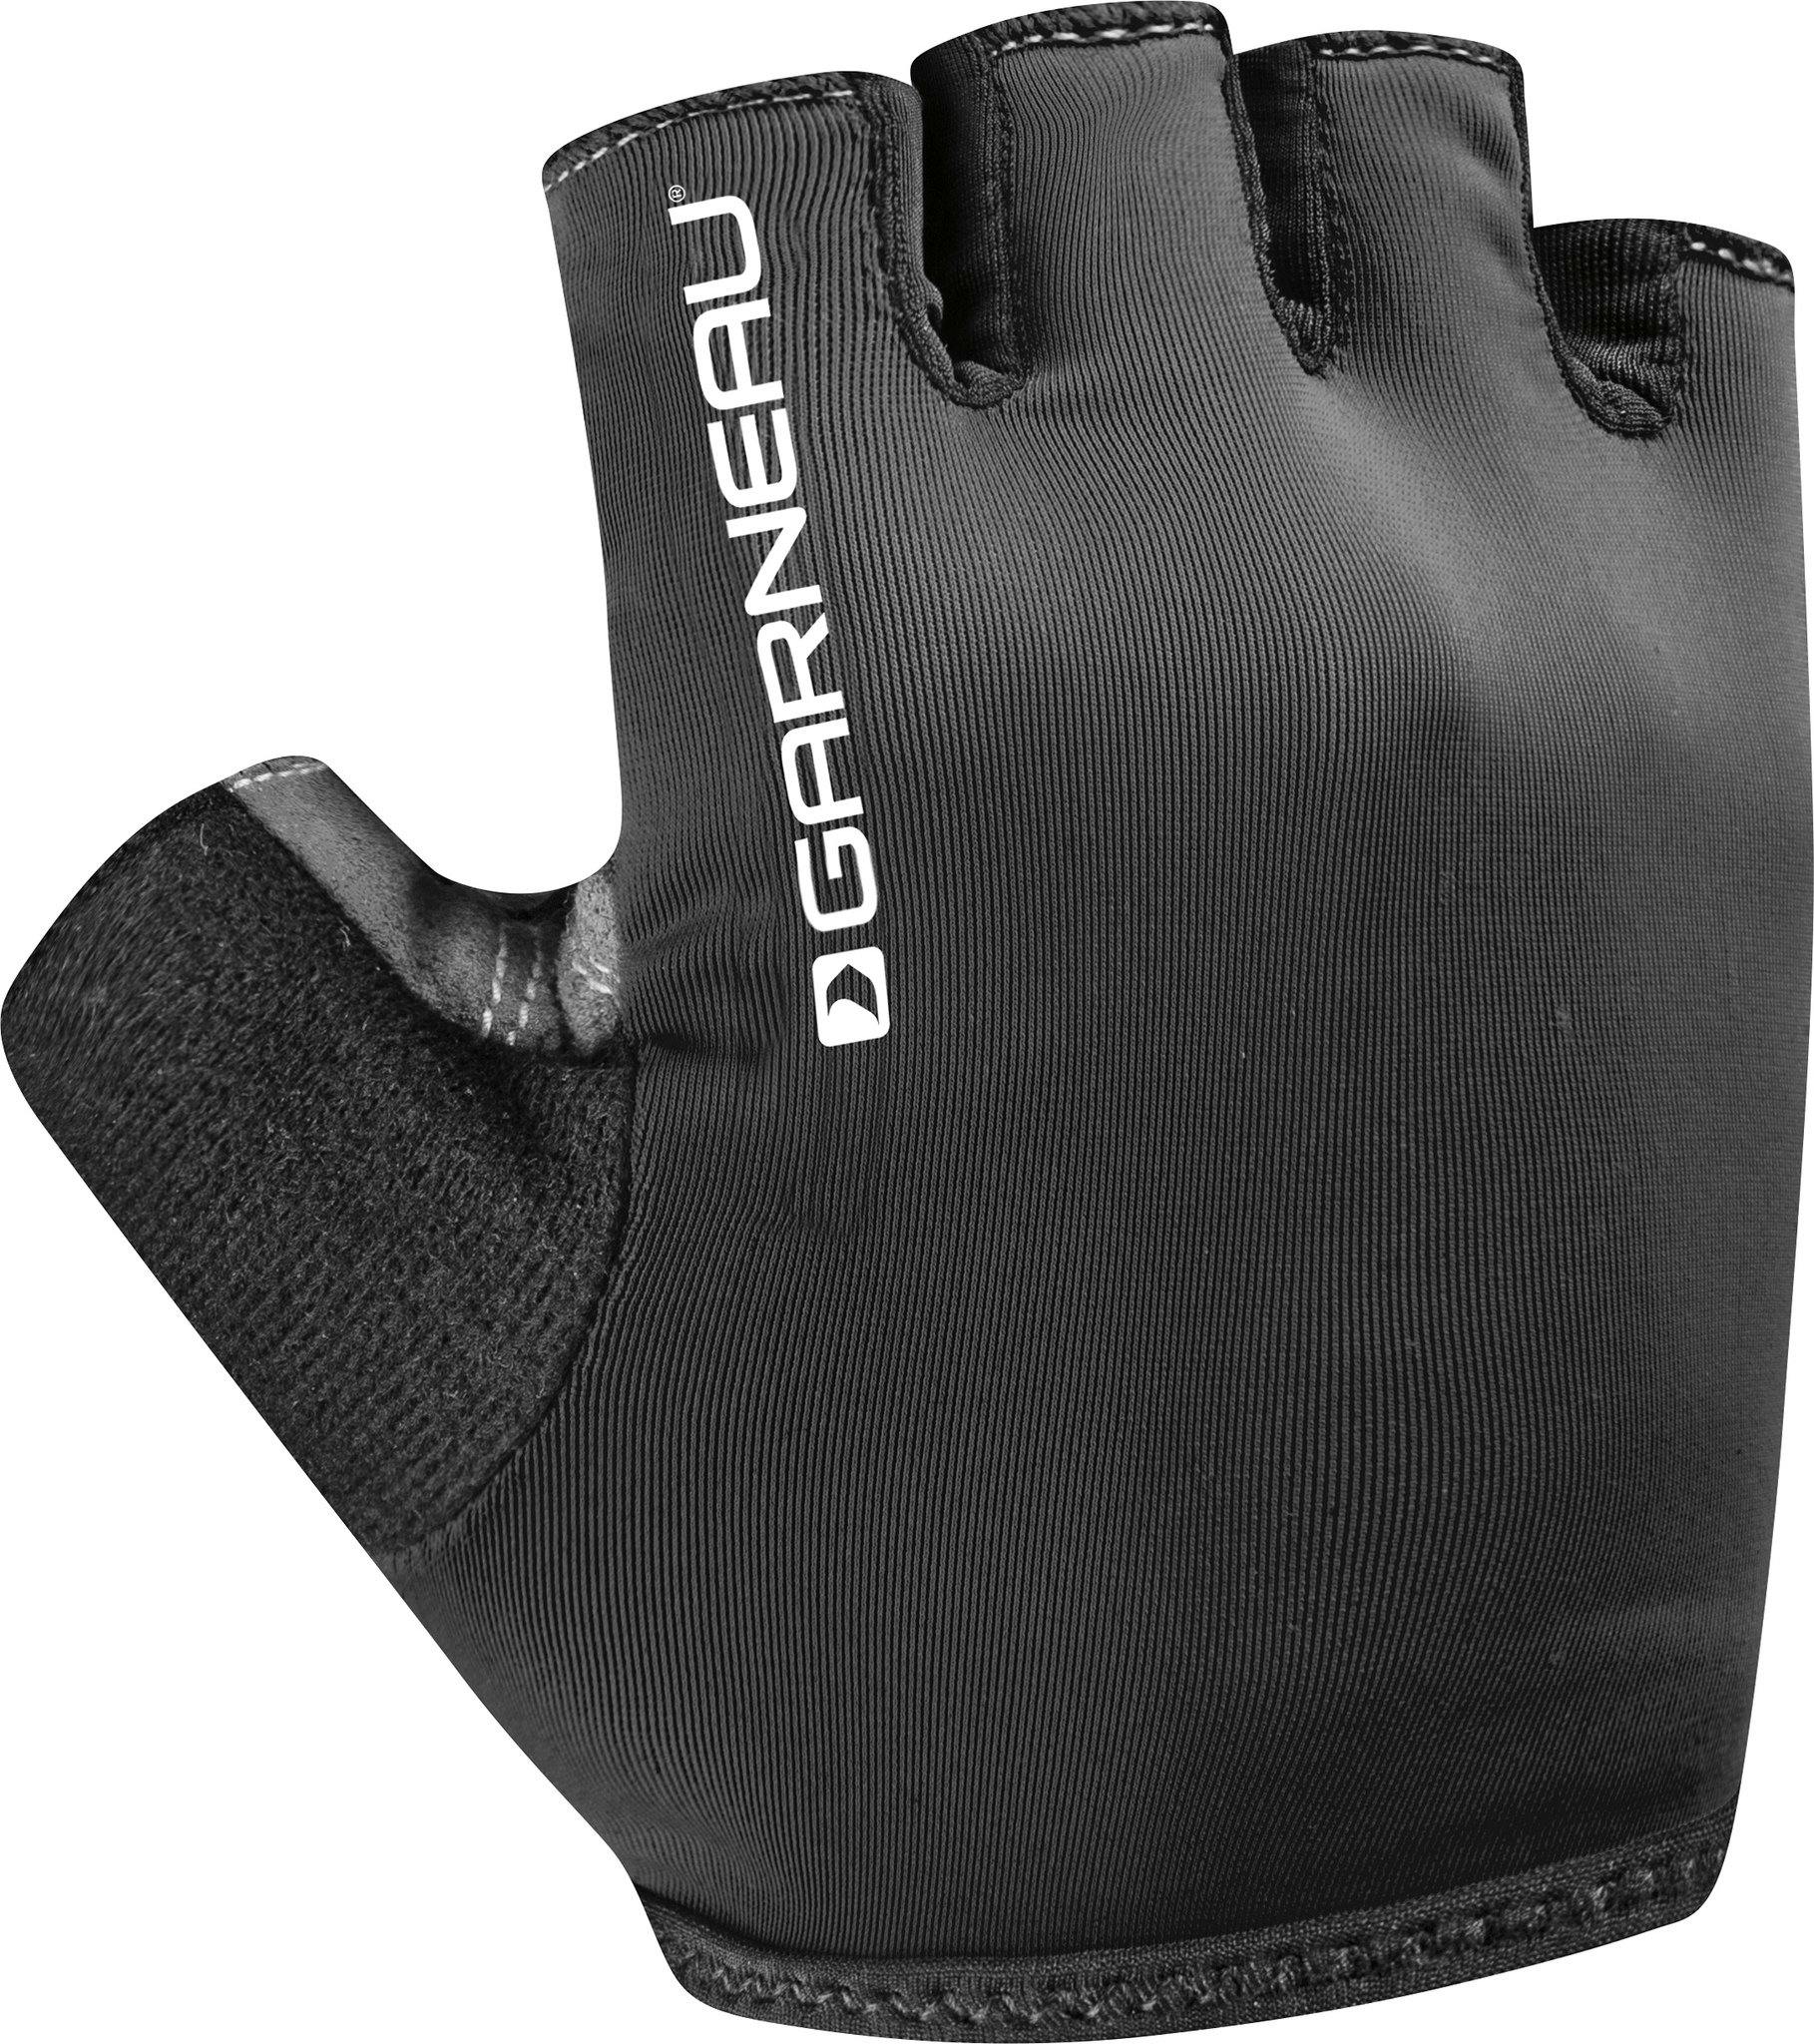 Product image for Calory Cycling Gloves - Youth